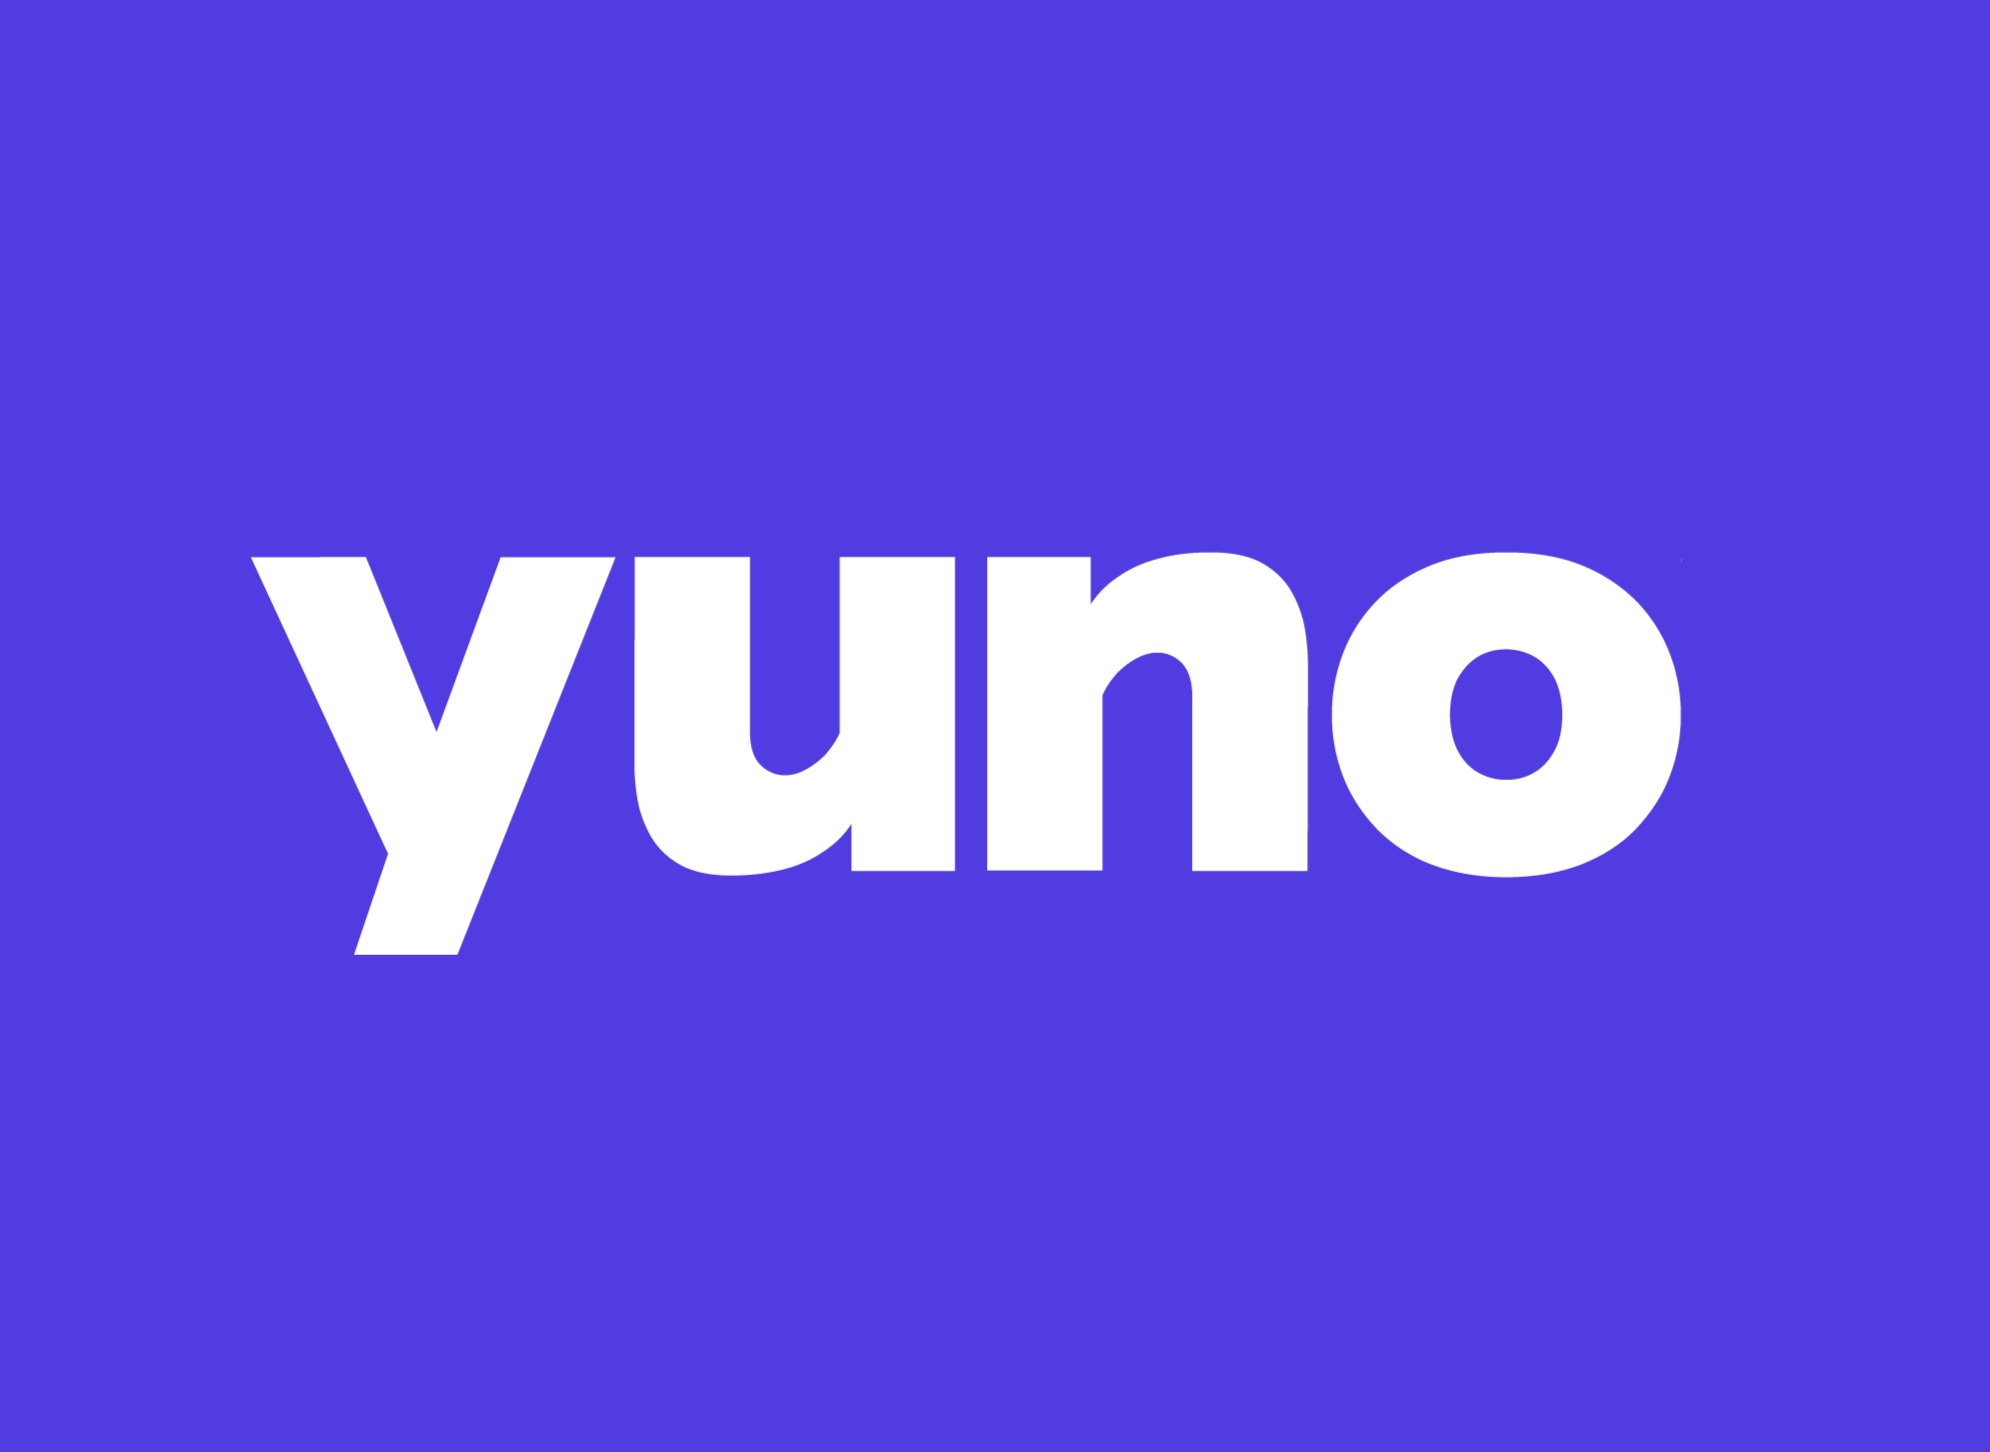 Yuno: The Rising Star In The Fintech World